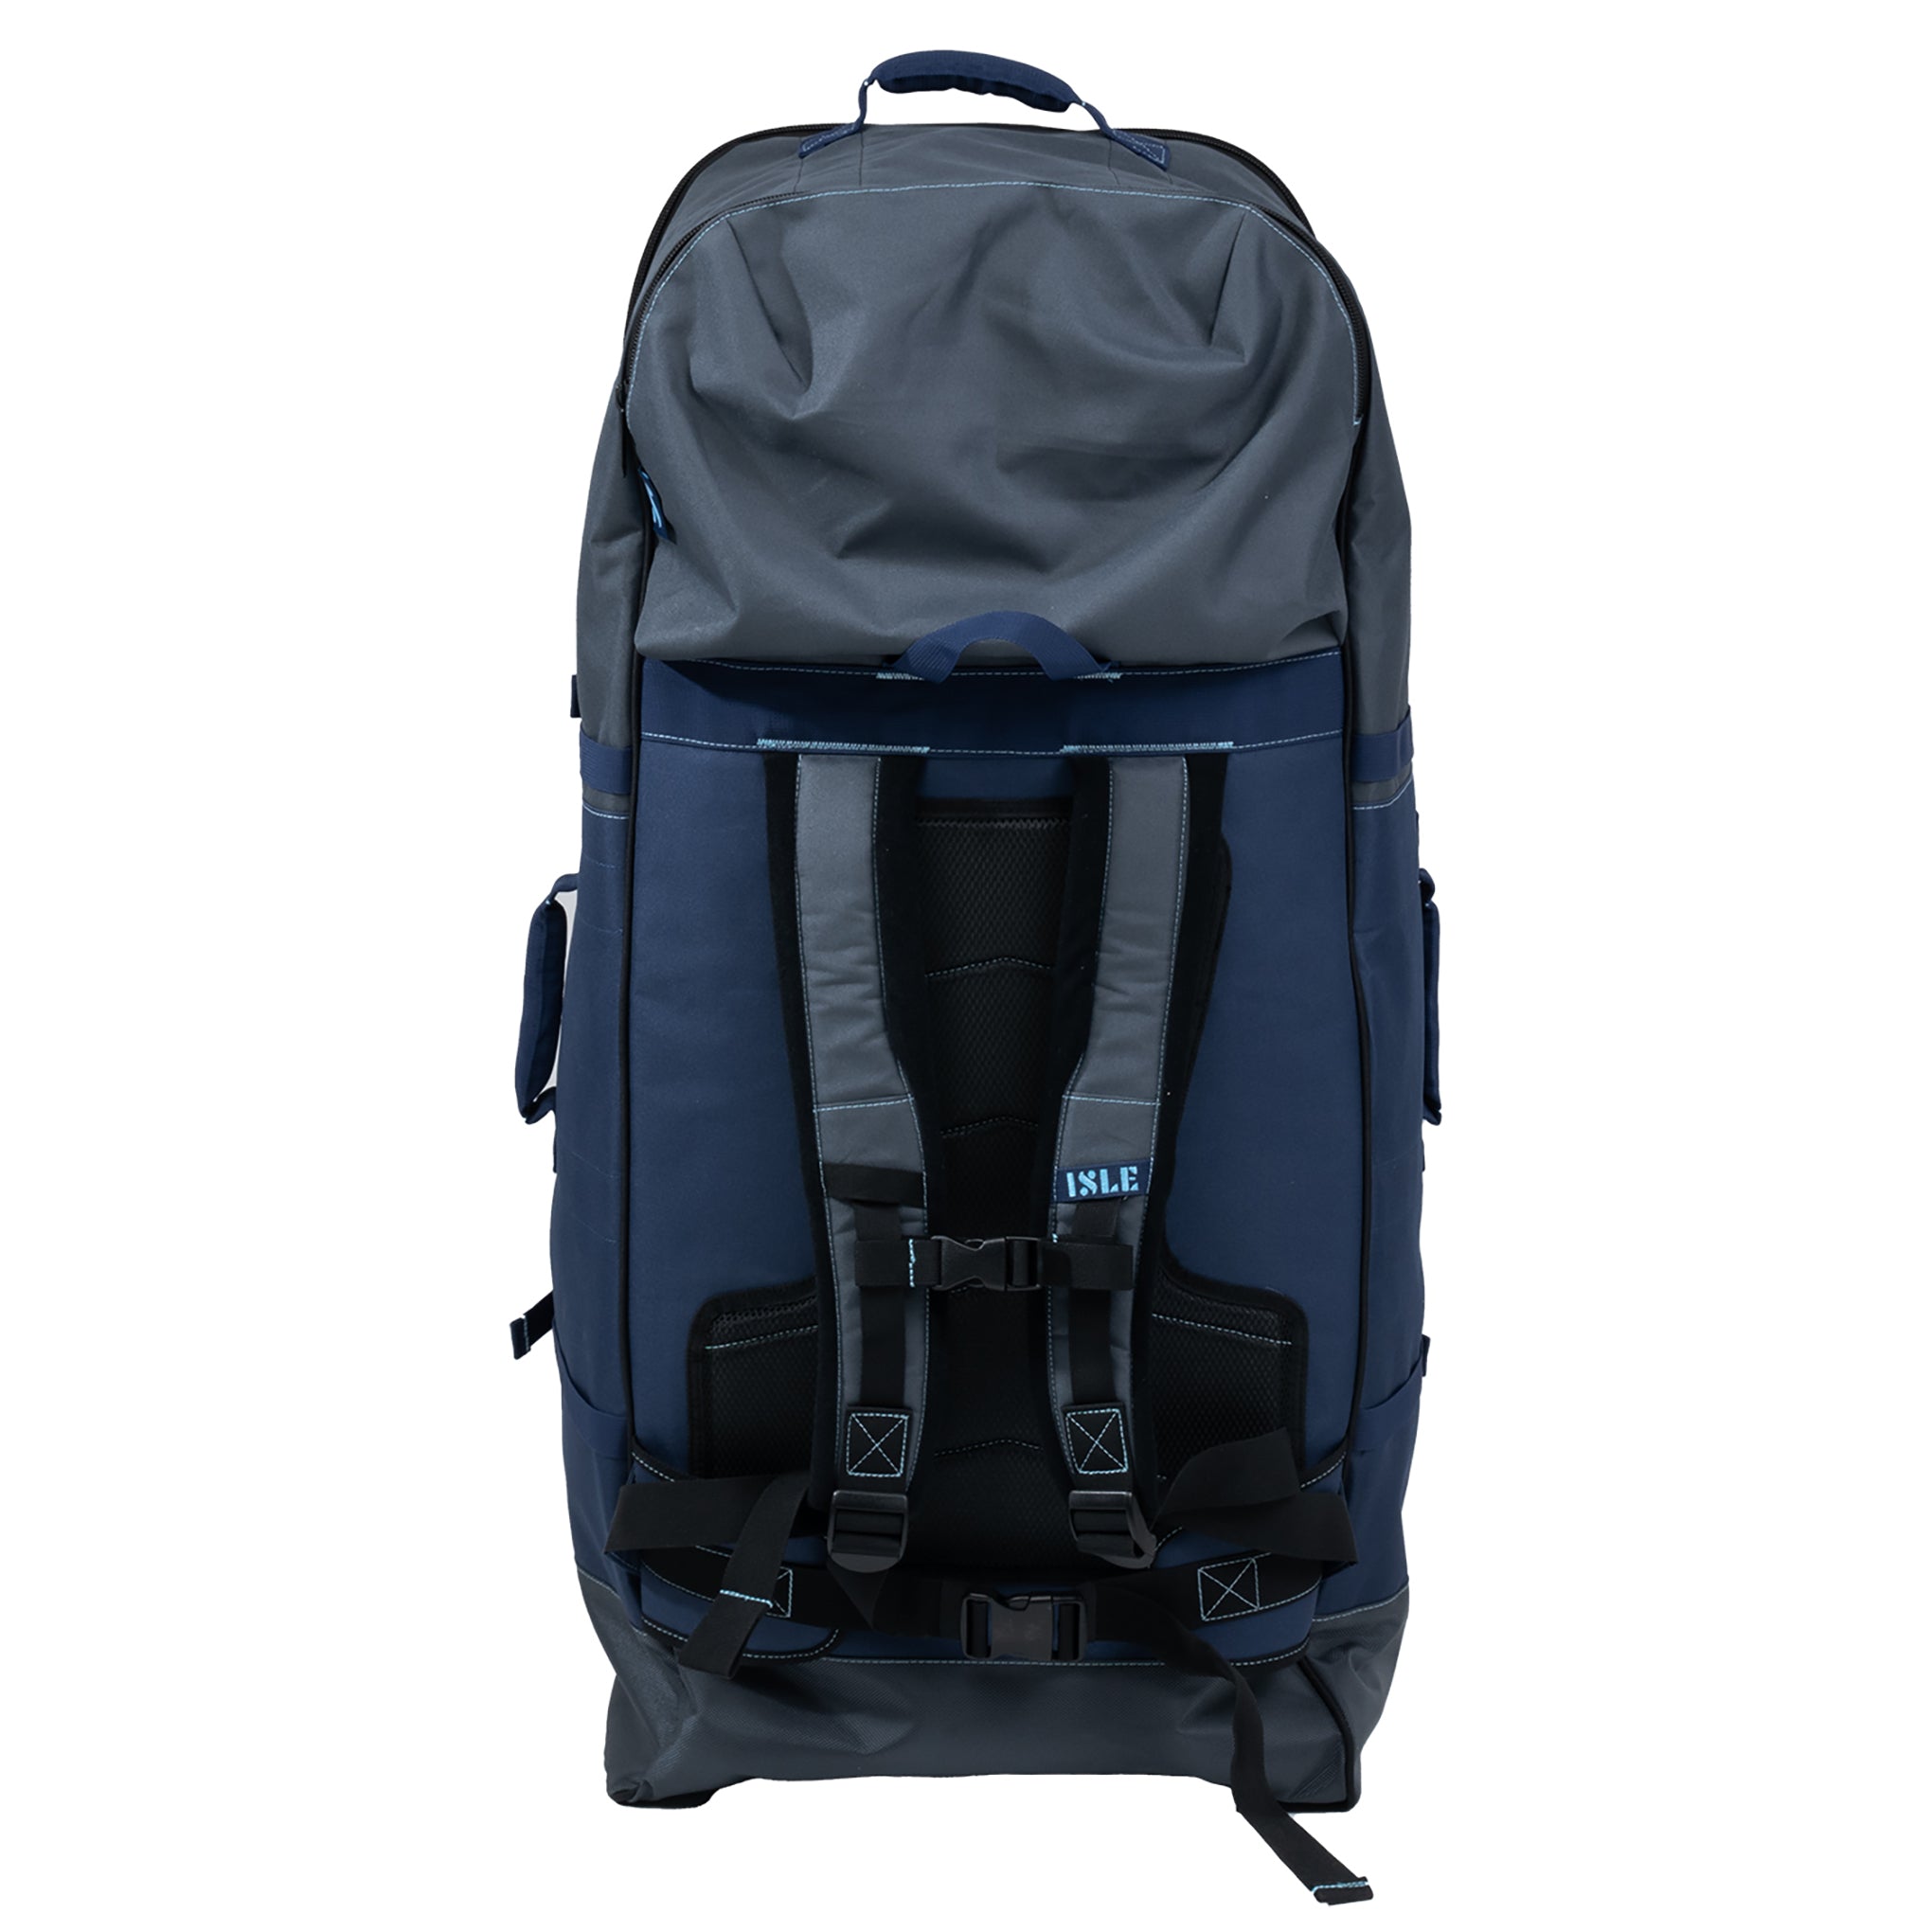 Pro Series Wheelie Backpack Back View of Backpack Straps